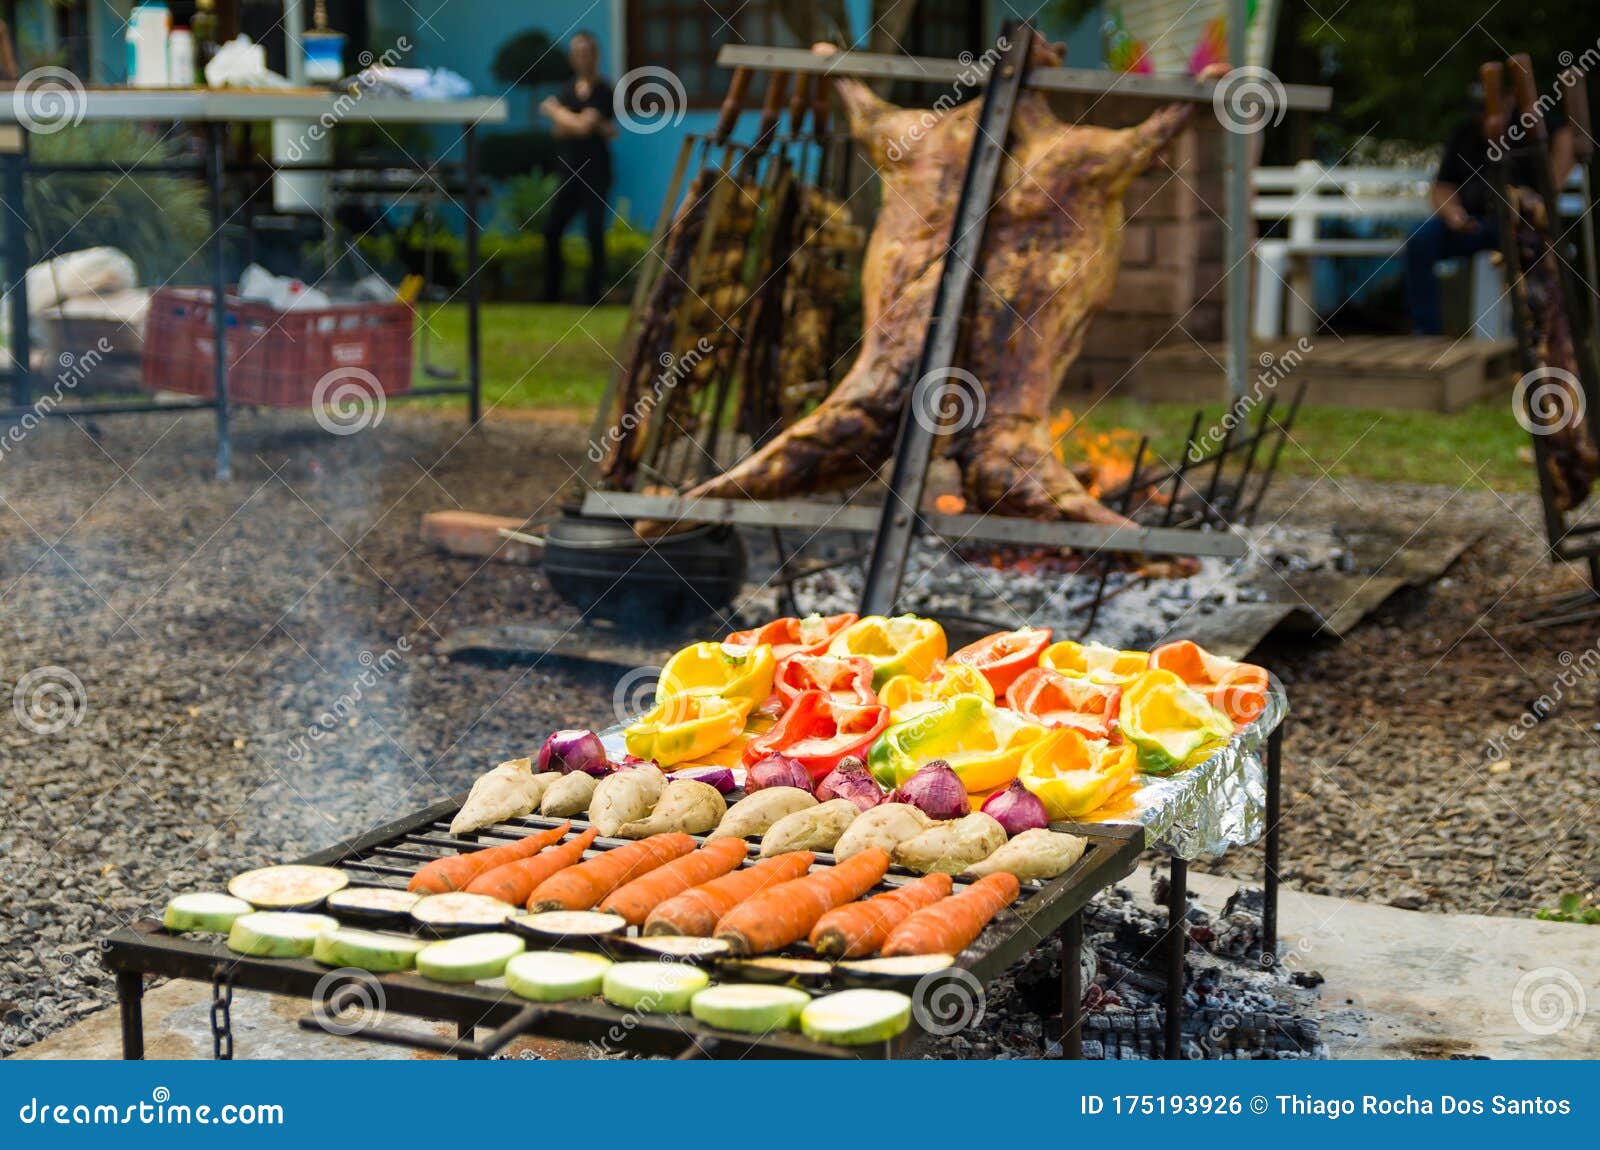 meat and vegetable exhibition on a barbecue known as parrilla. typical barbecue from the south of latin america